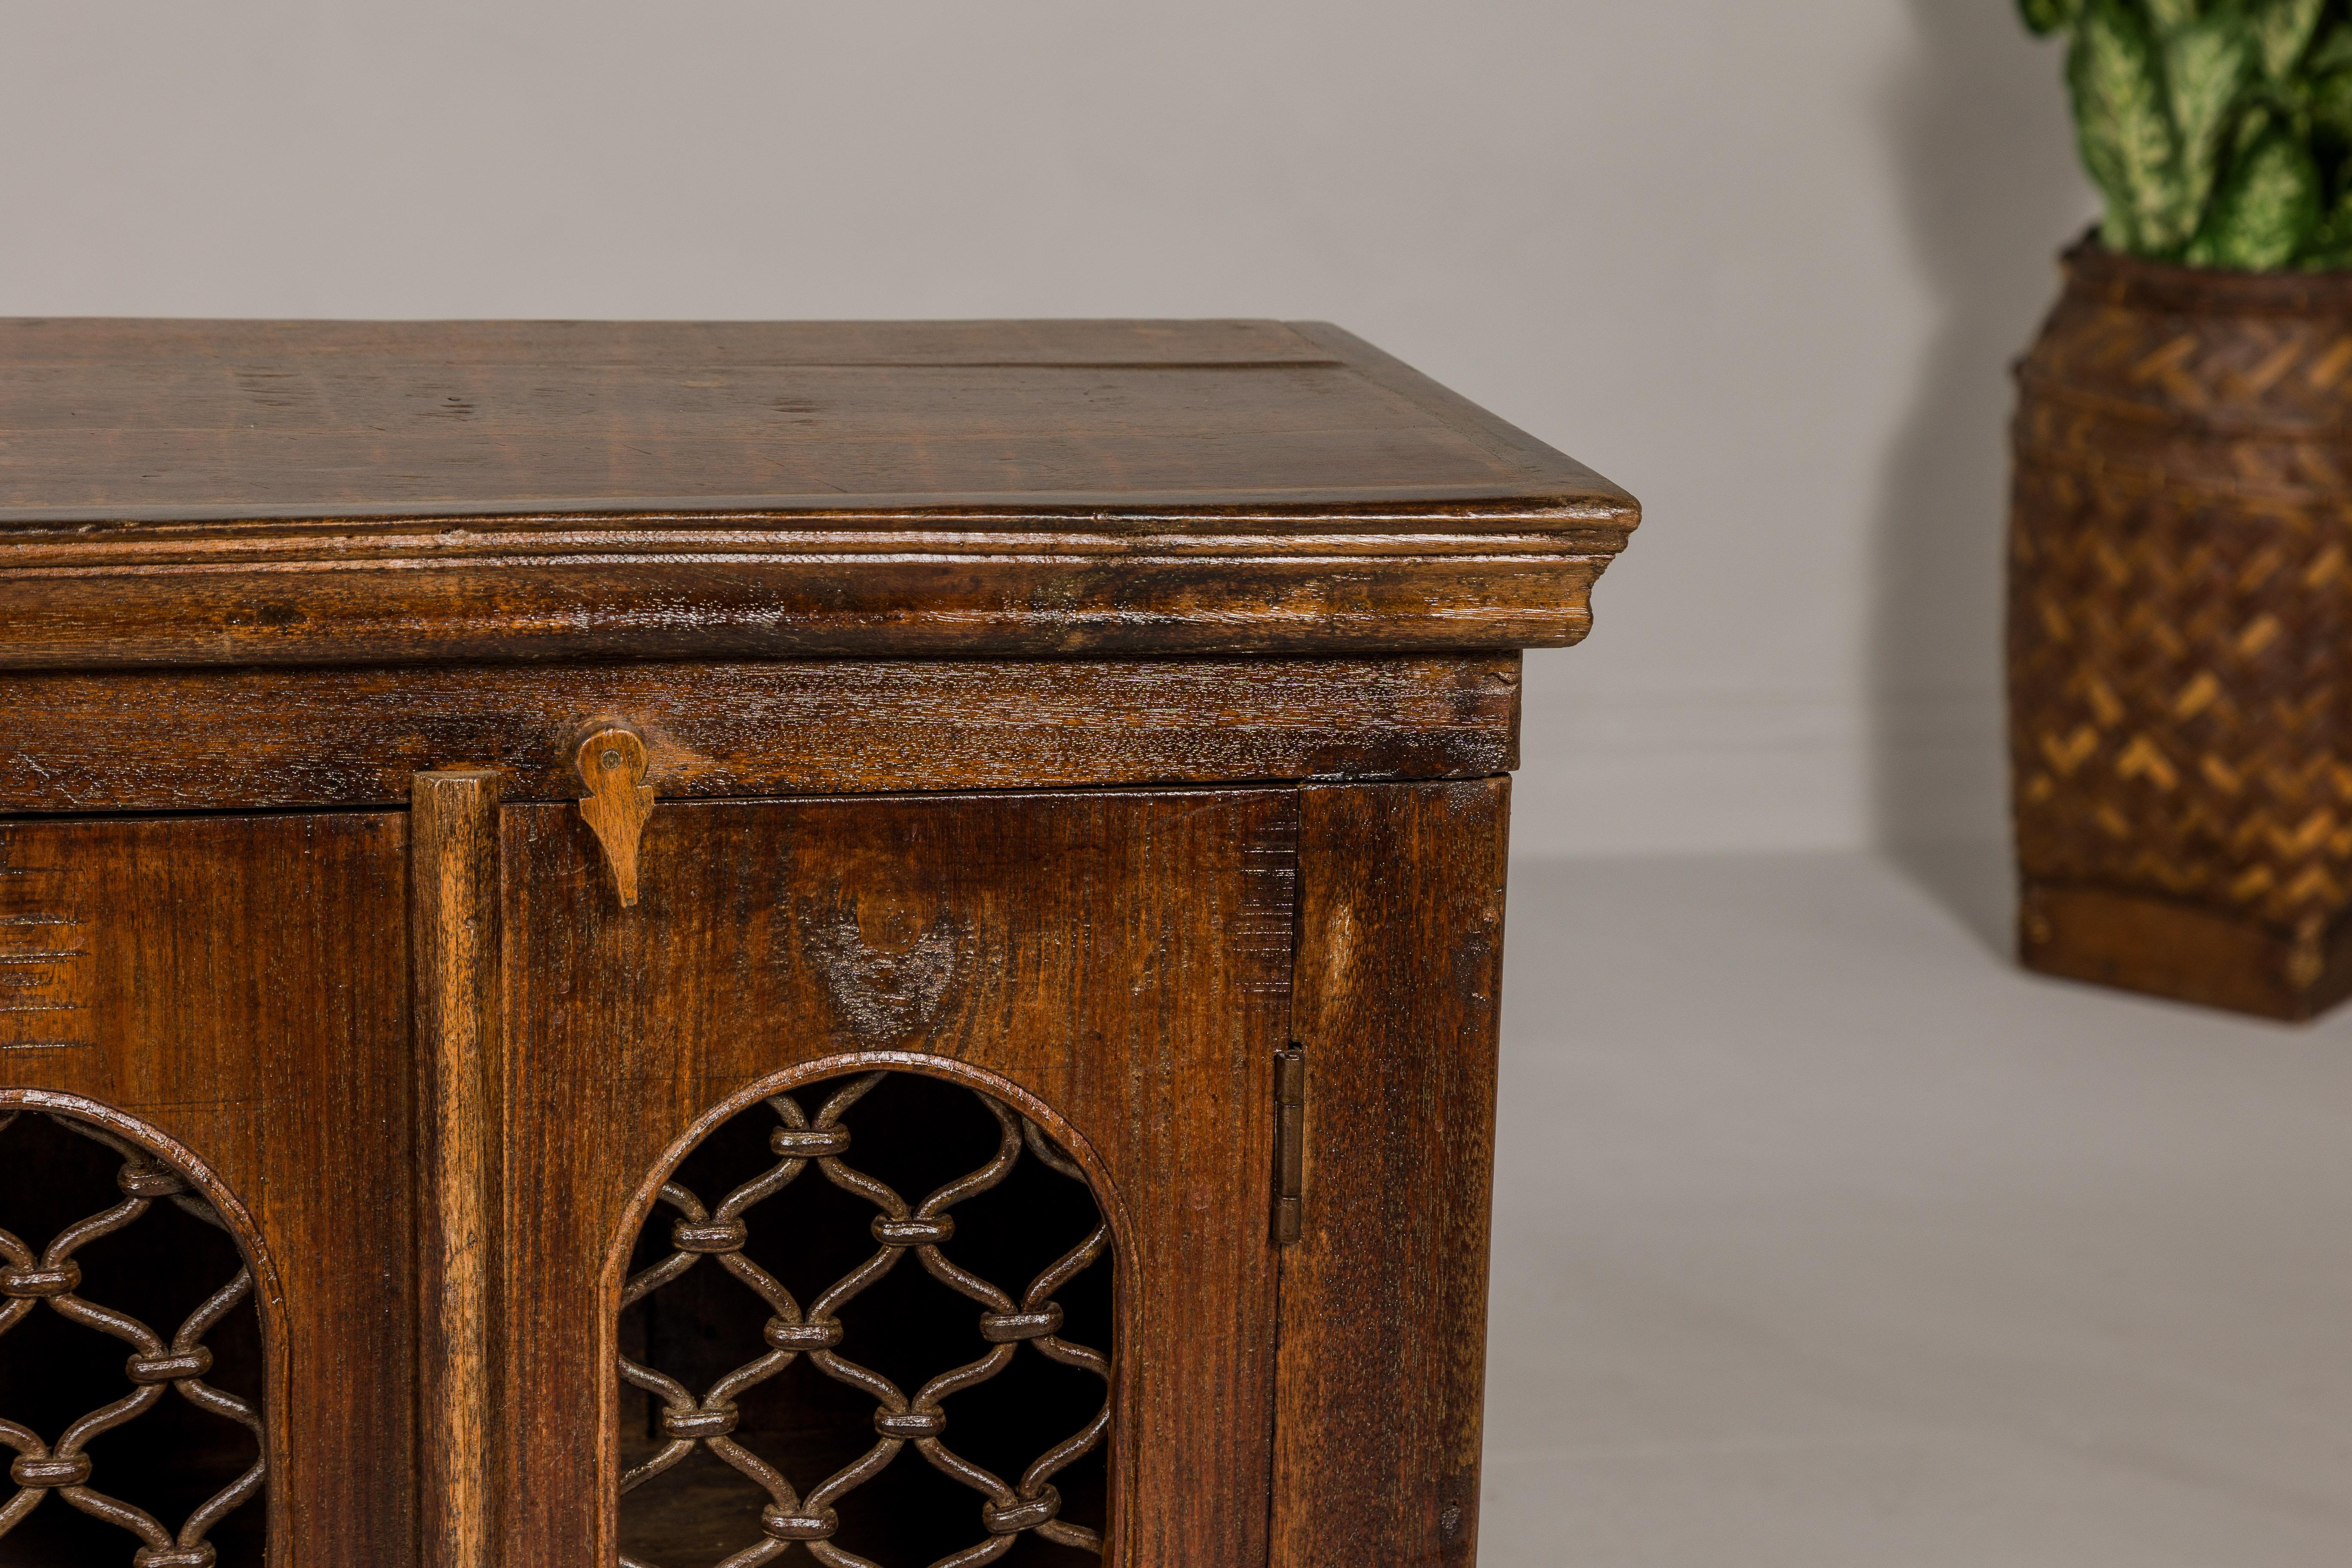 Indian 19th Century Wooden Side Cabinet with Arched Metal Grate Window Door For Sale 6